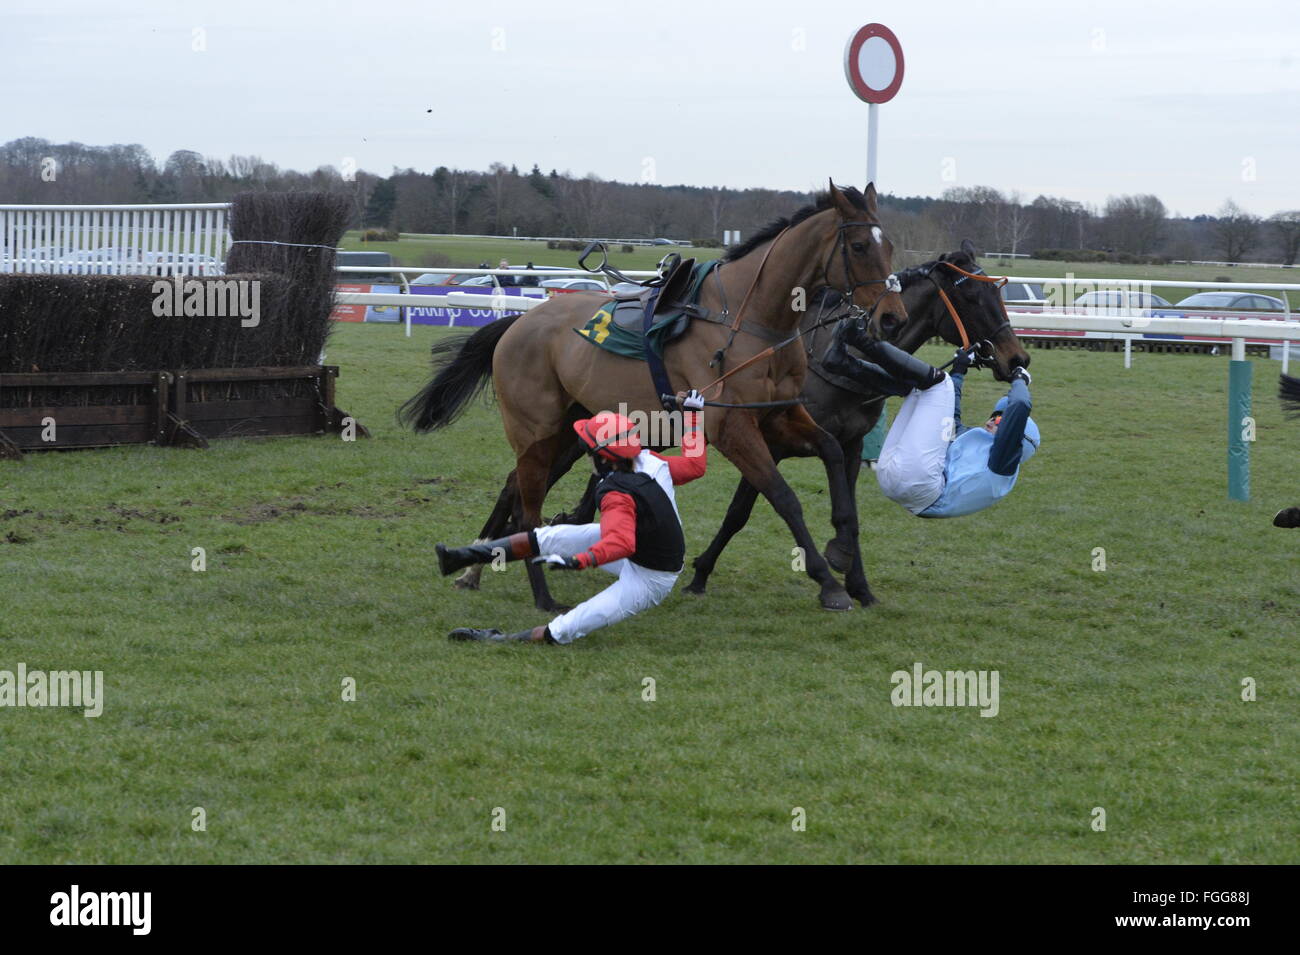 Fakenham Races 19.02.16  Victoria Pendleton falls from her horse Pacha Du Polder after clashing with Baltic Blue ridden by Carey Williamson during the 4.15 race at Fakenham. Stock Photo